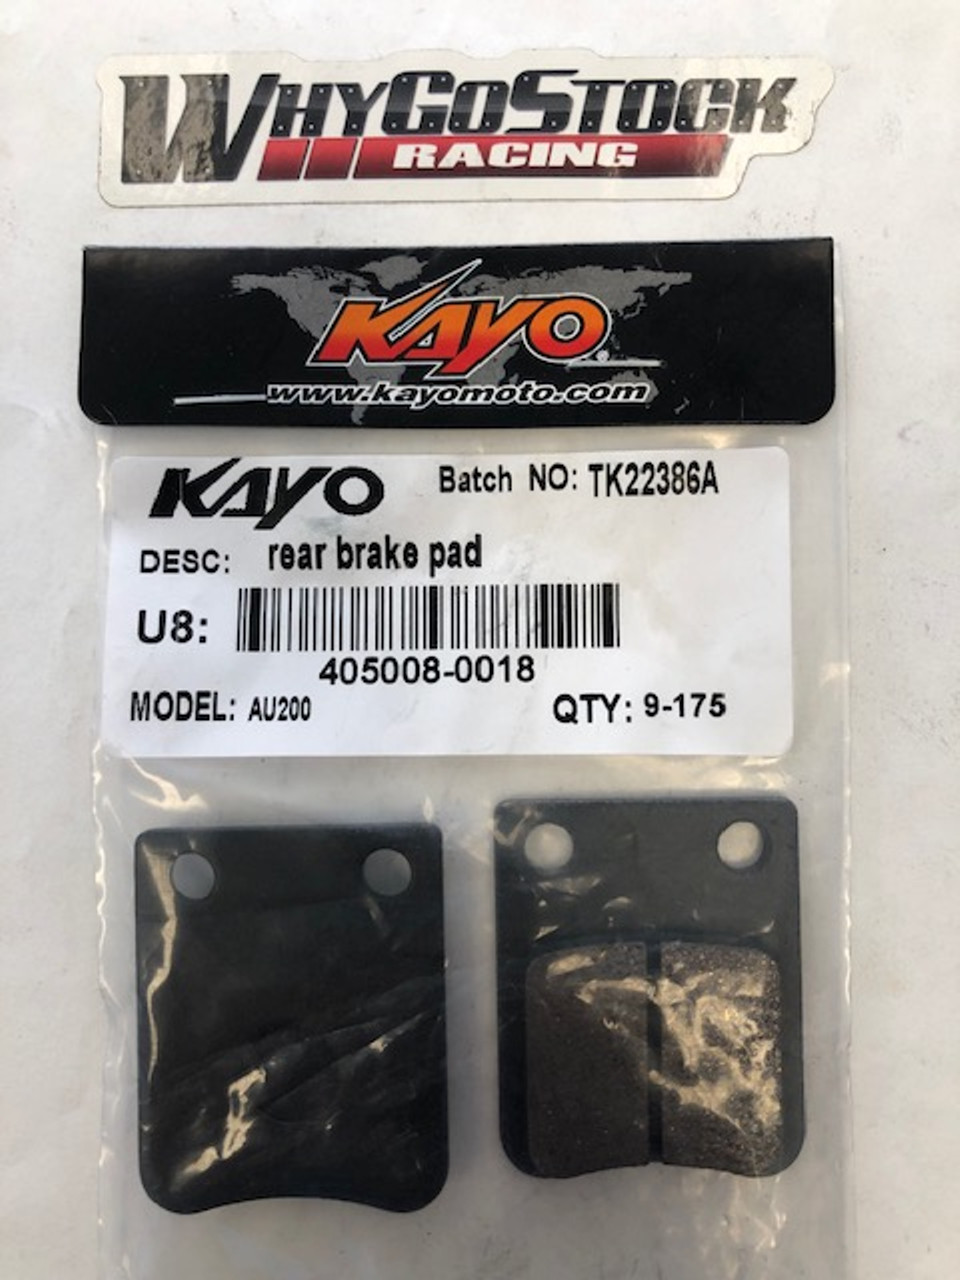 Kayo Bull 200 Rear Brake Pads (Late 2020 and newer with 2 sets of pads)